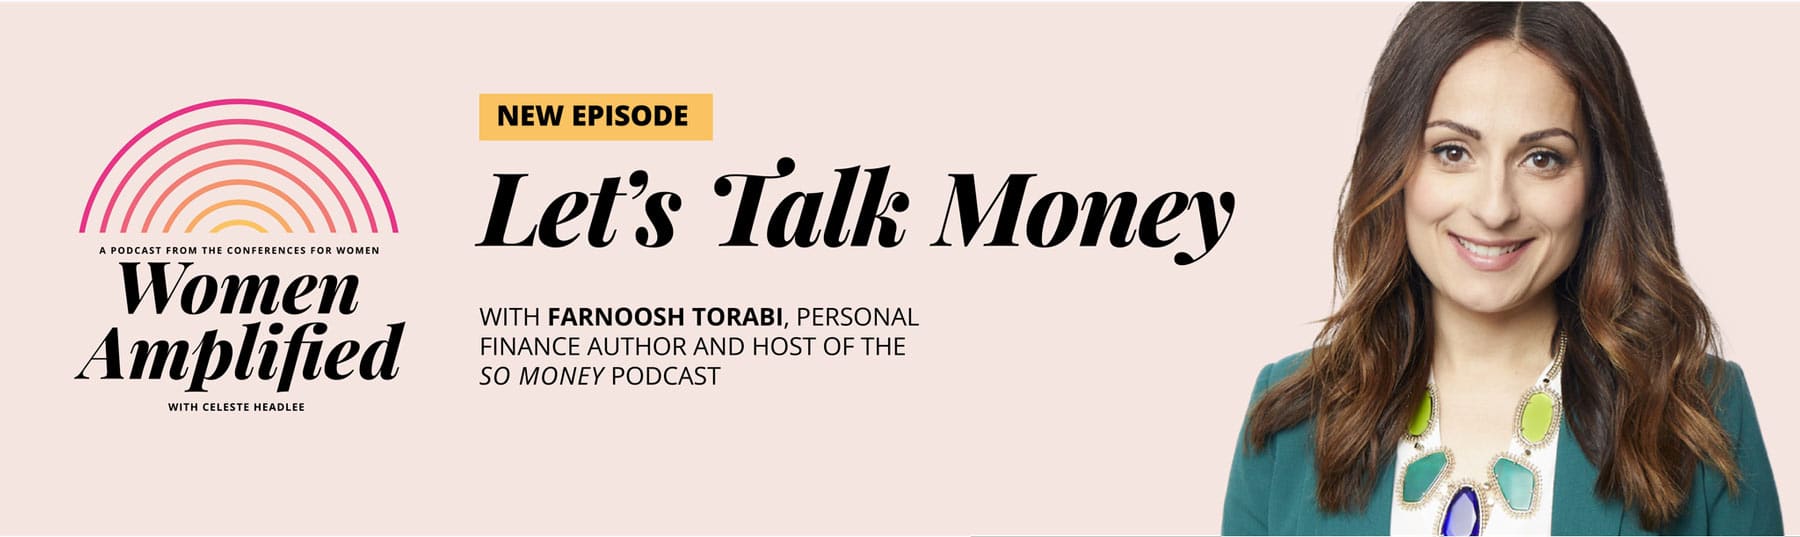 Let's Talk Money with Farnoosh Torabi on the Women Amplified podcast